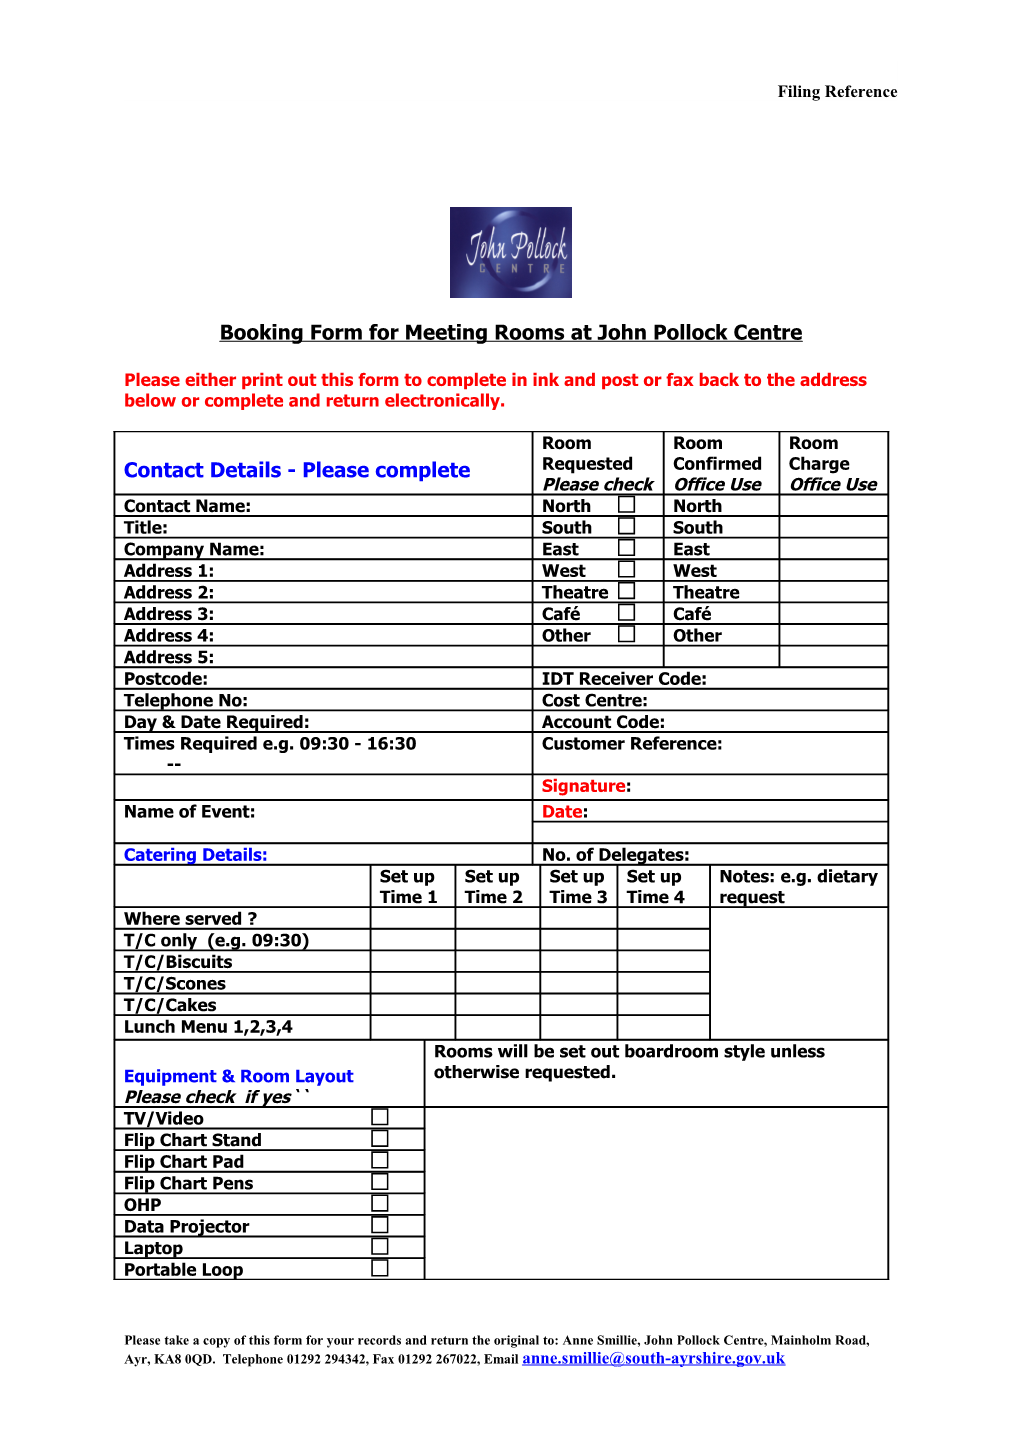 Booking Form for Meeting Rooms at John Pollock Centre